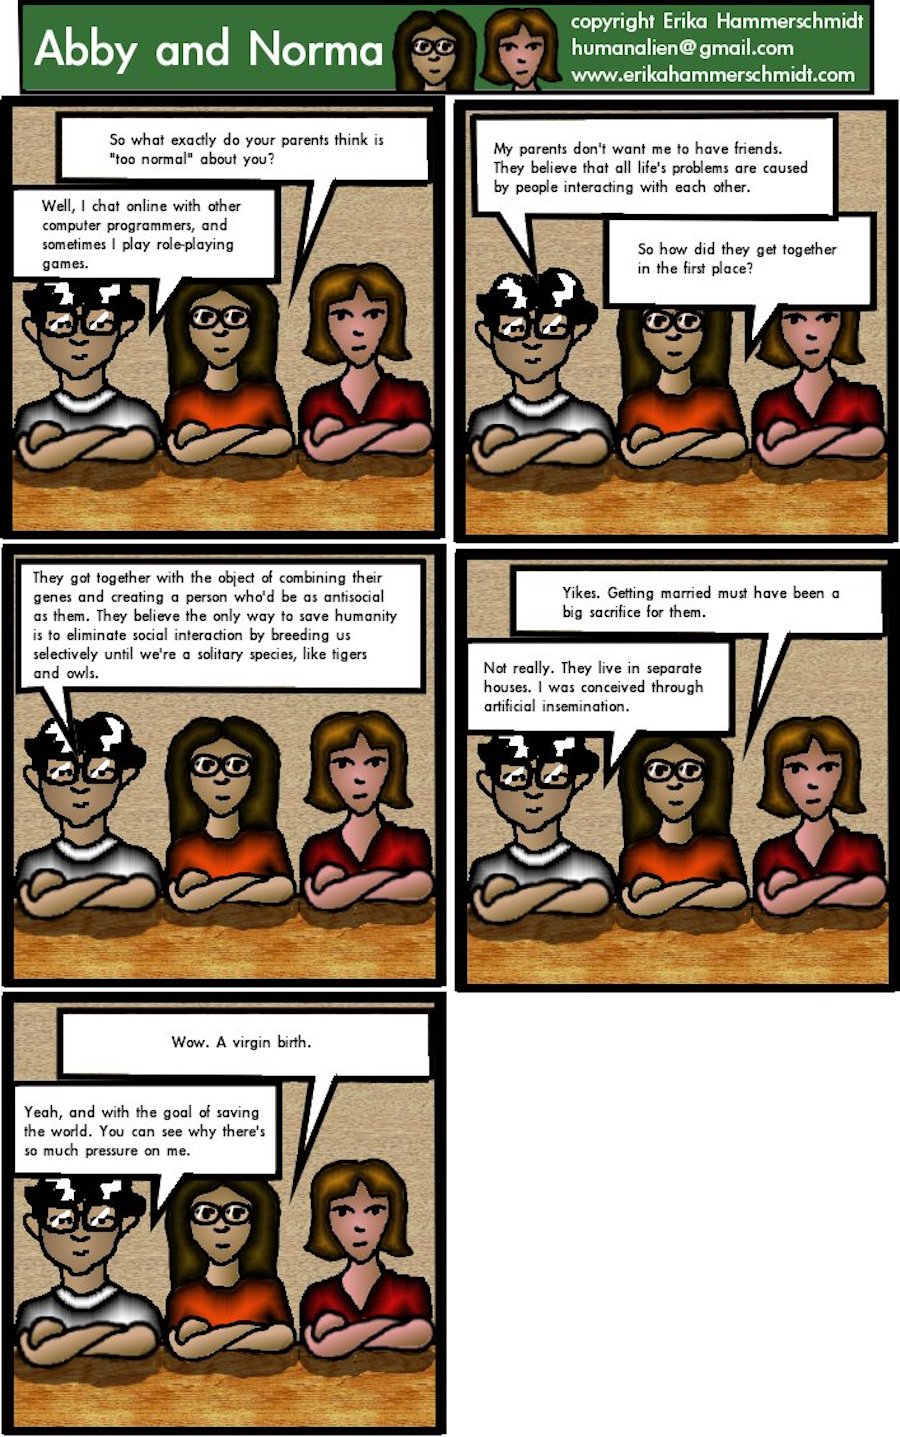  Strip #50 does not apply to Hans. Stories about him have no implied sex.